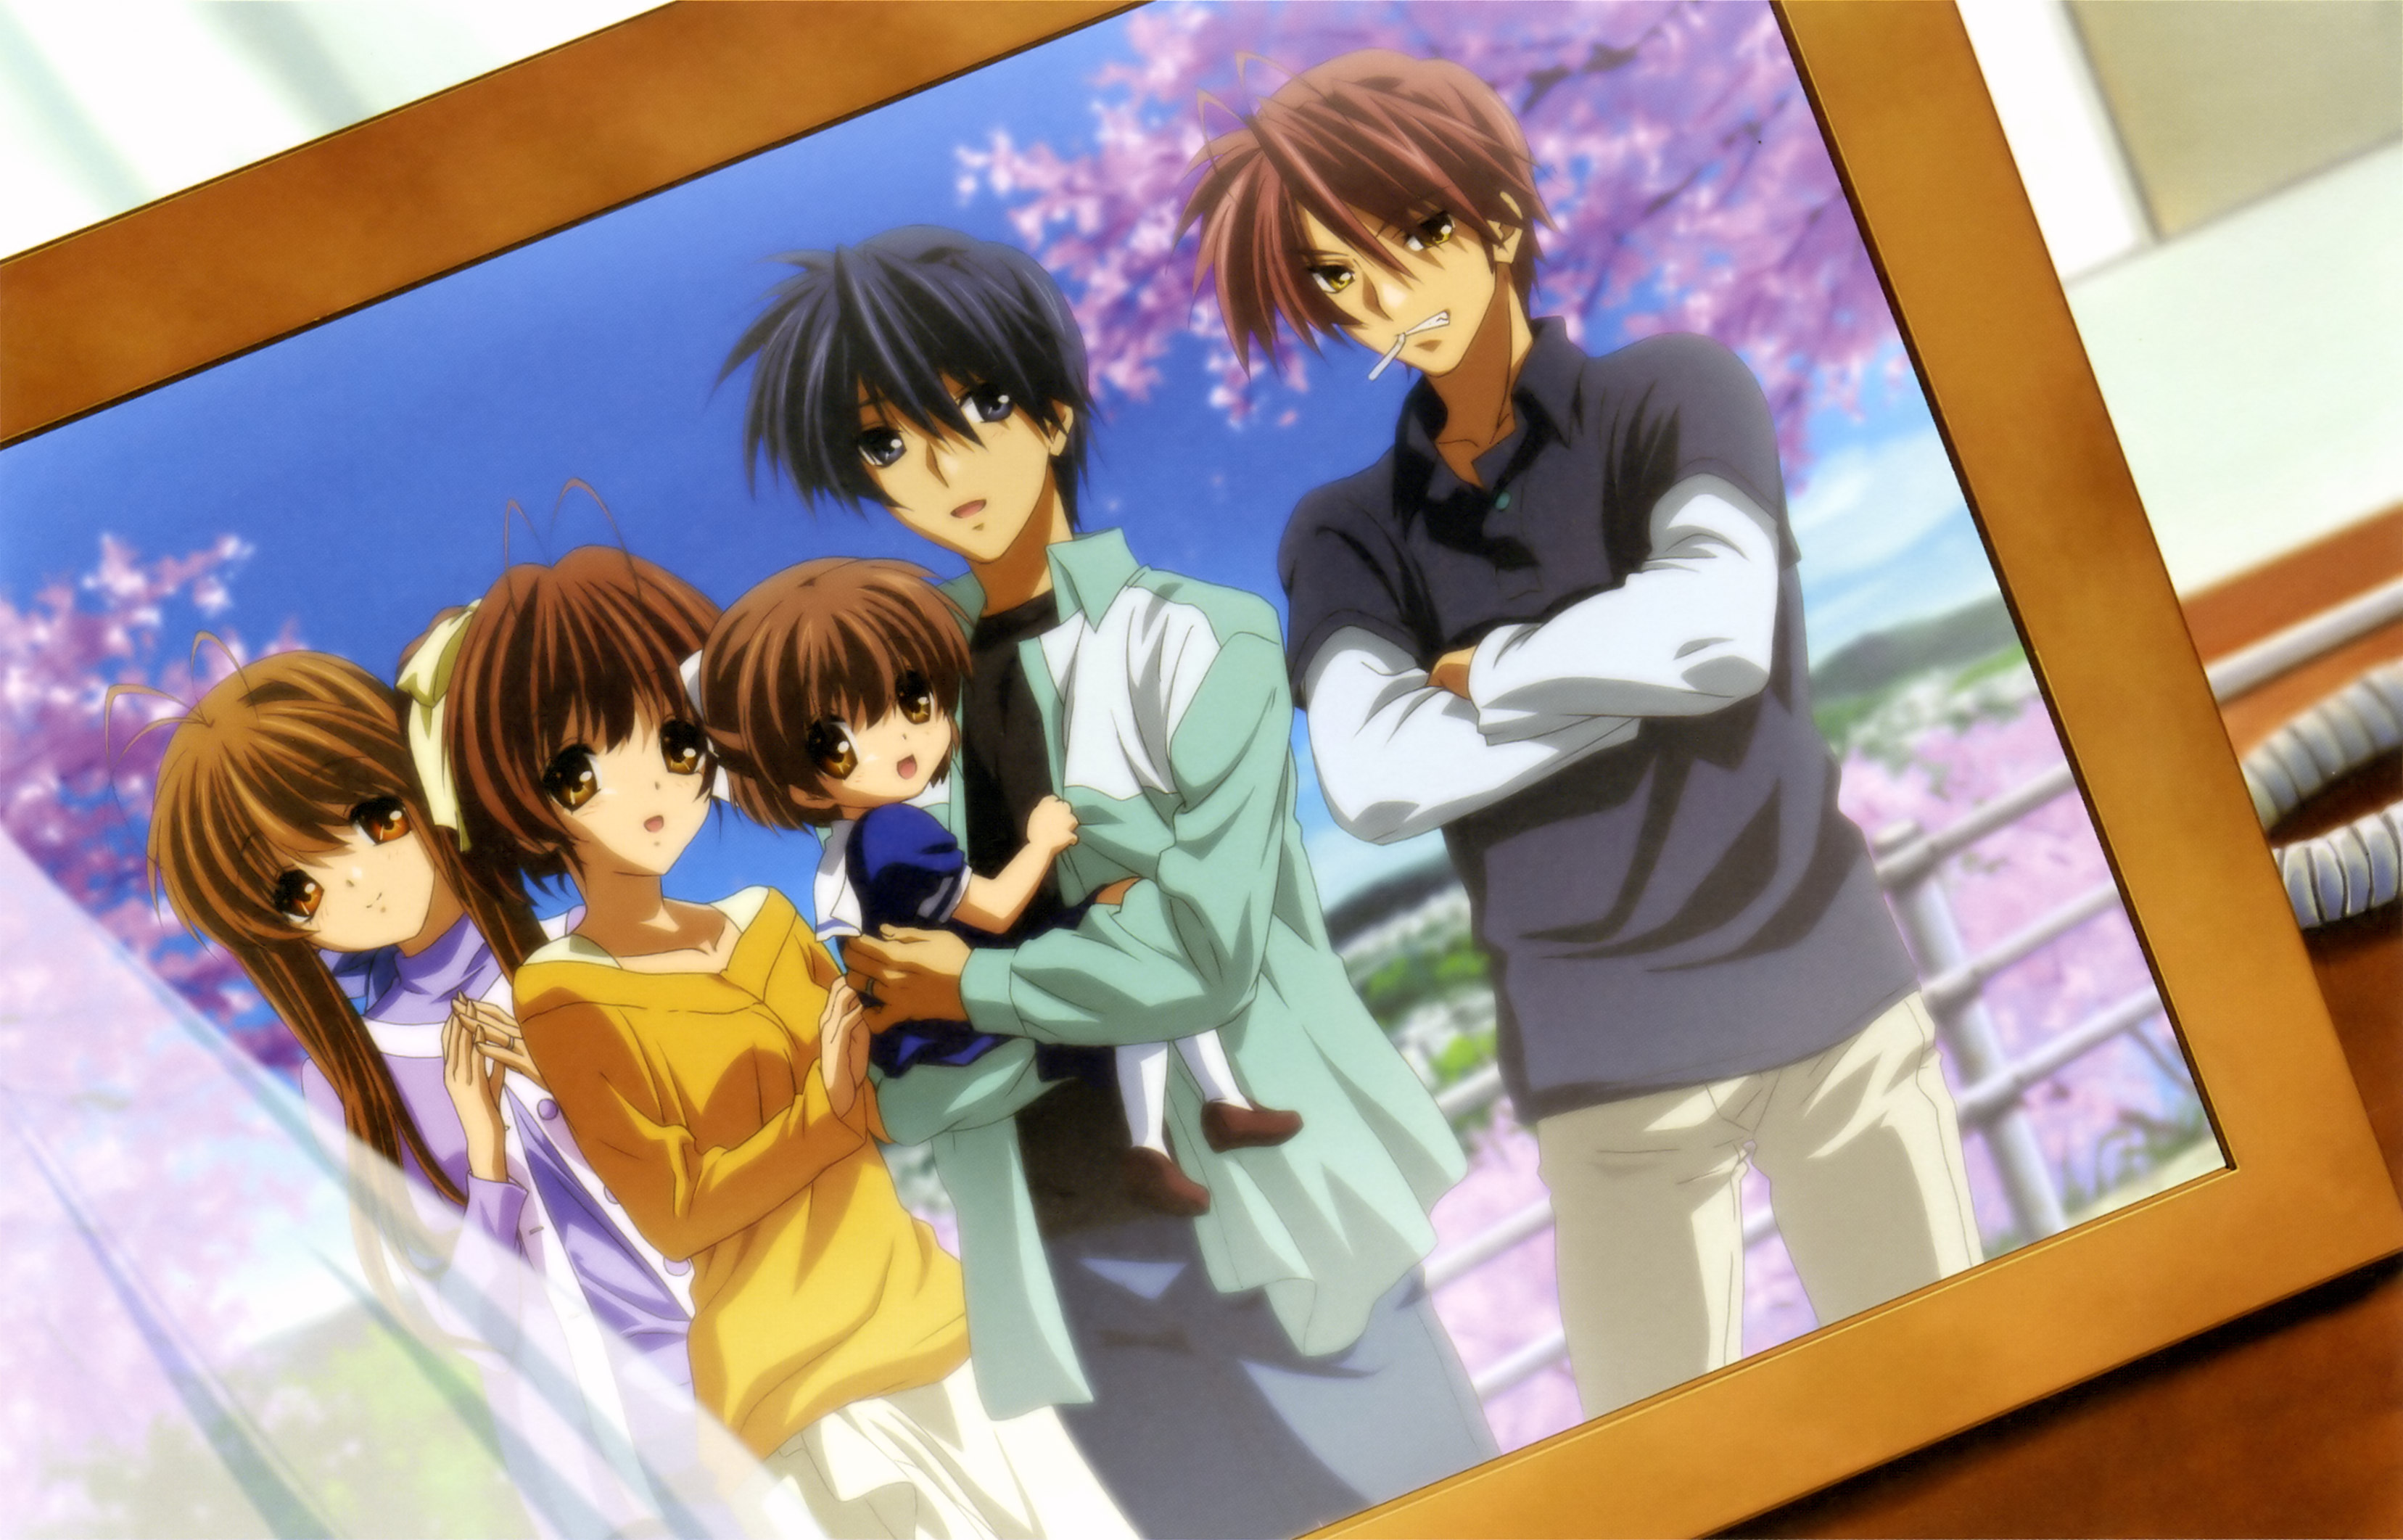 Clannad & Clannad: after story - Coffee Senpai